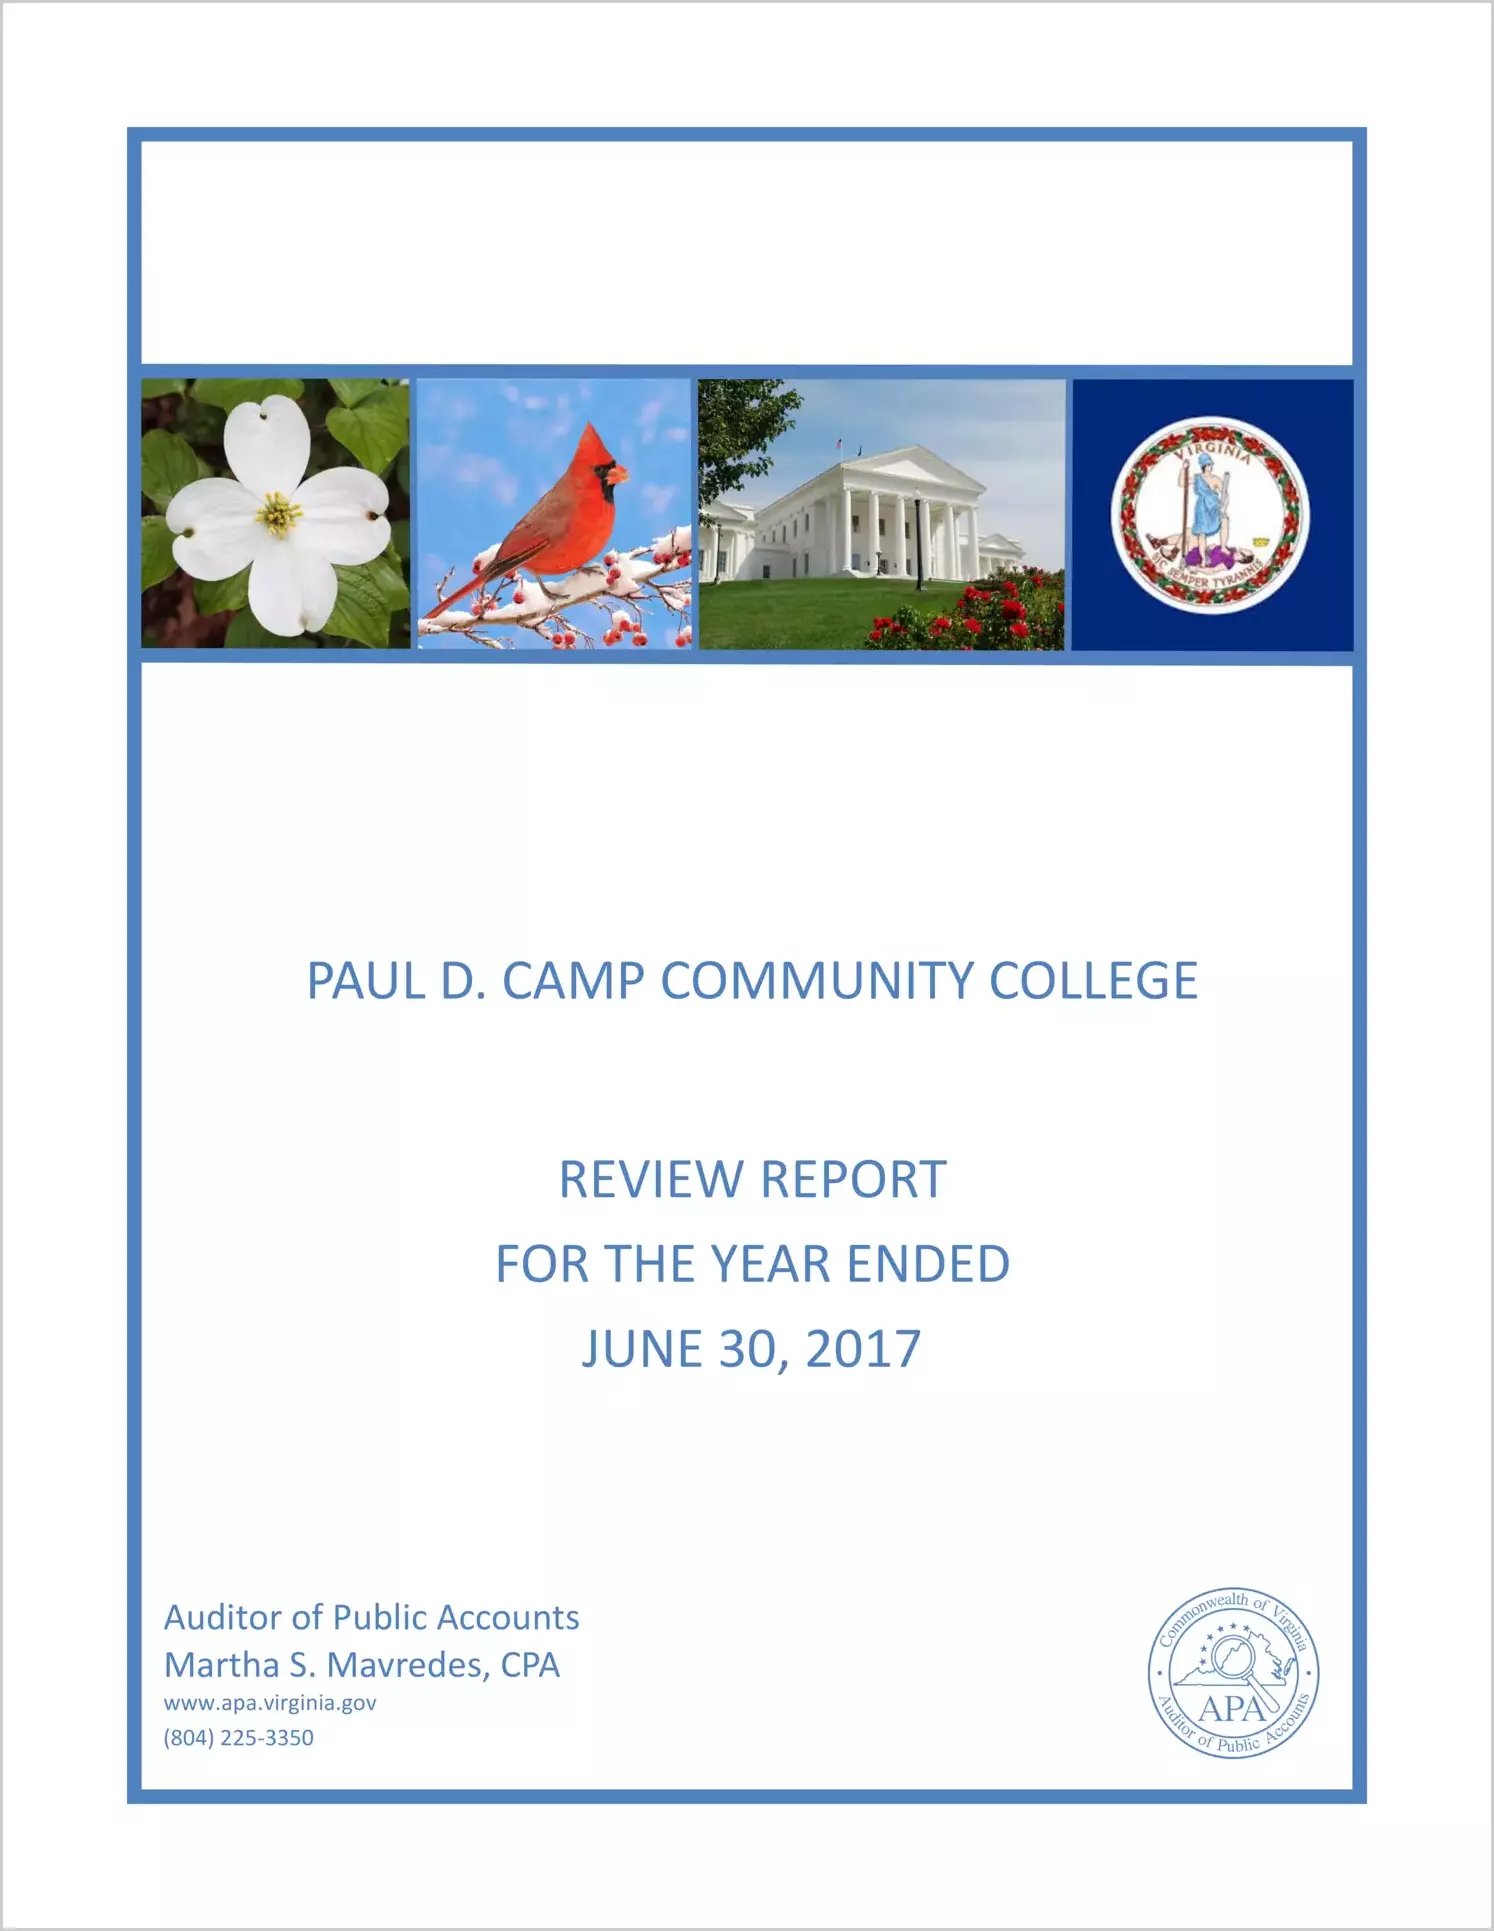 Paul D. Camp Community College Review for the year ended June 30, 2017